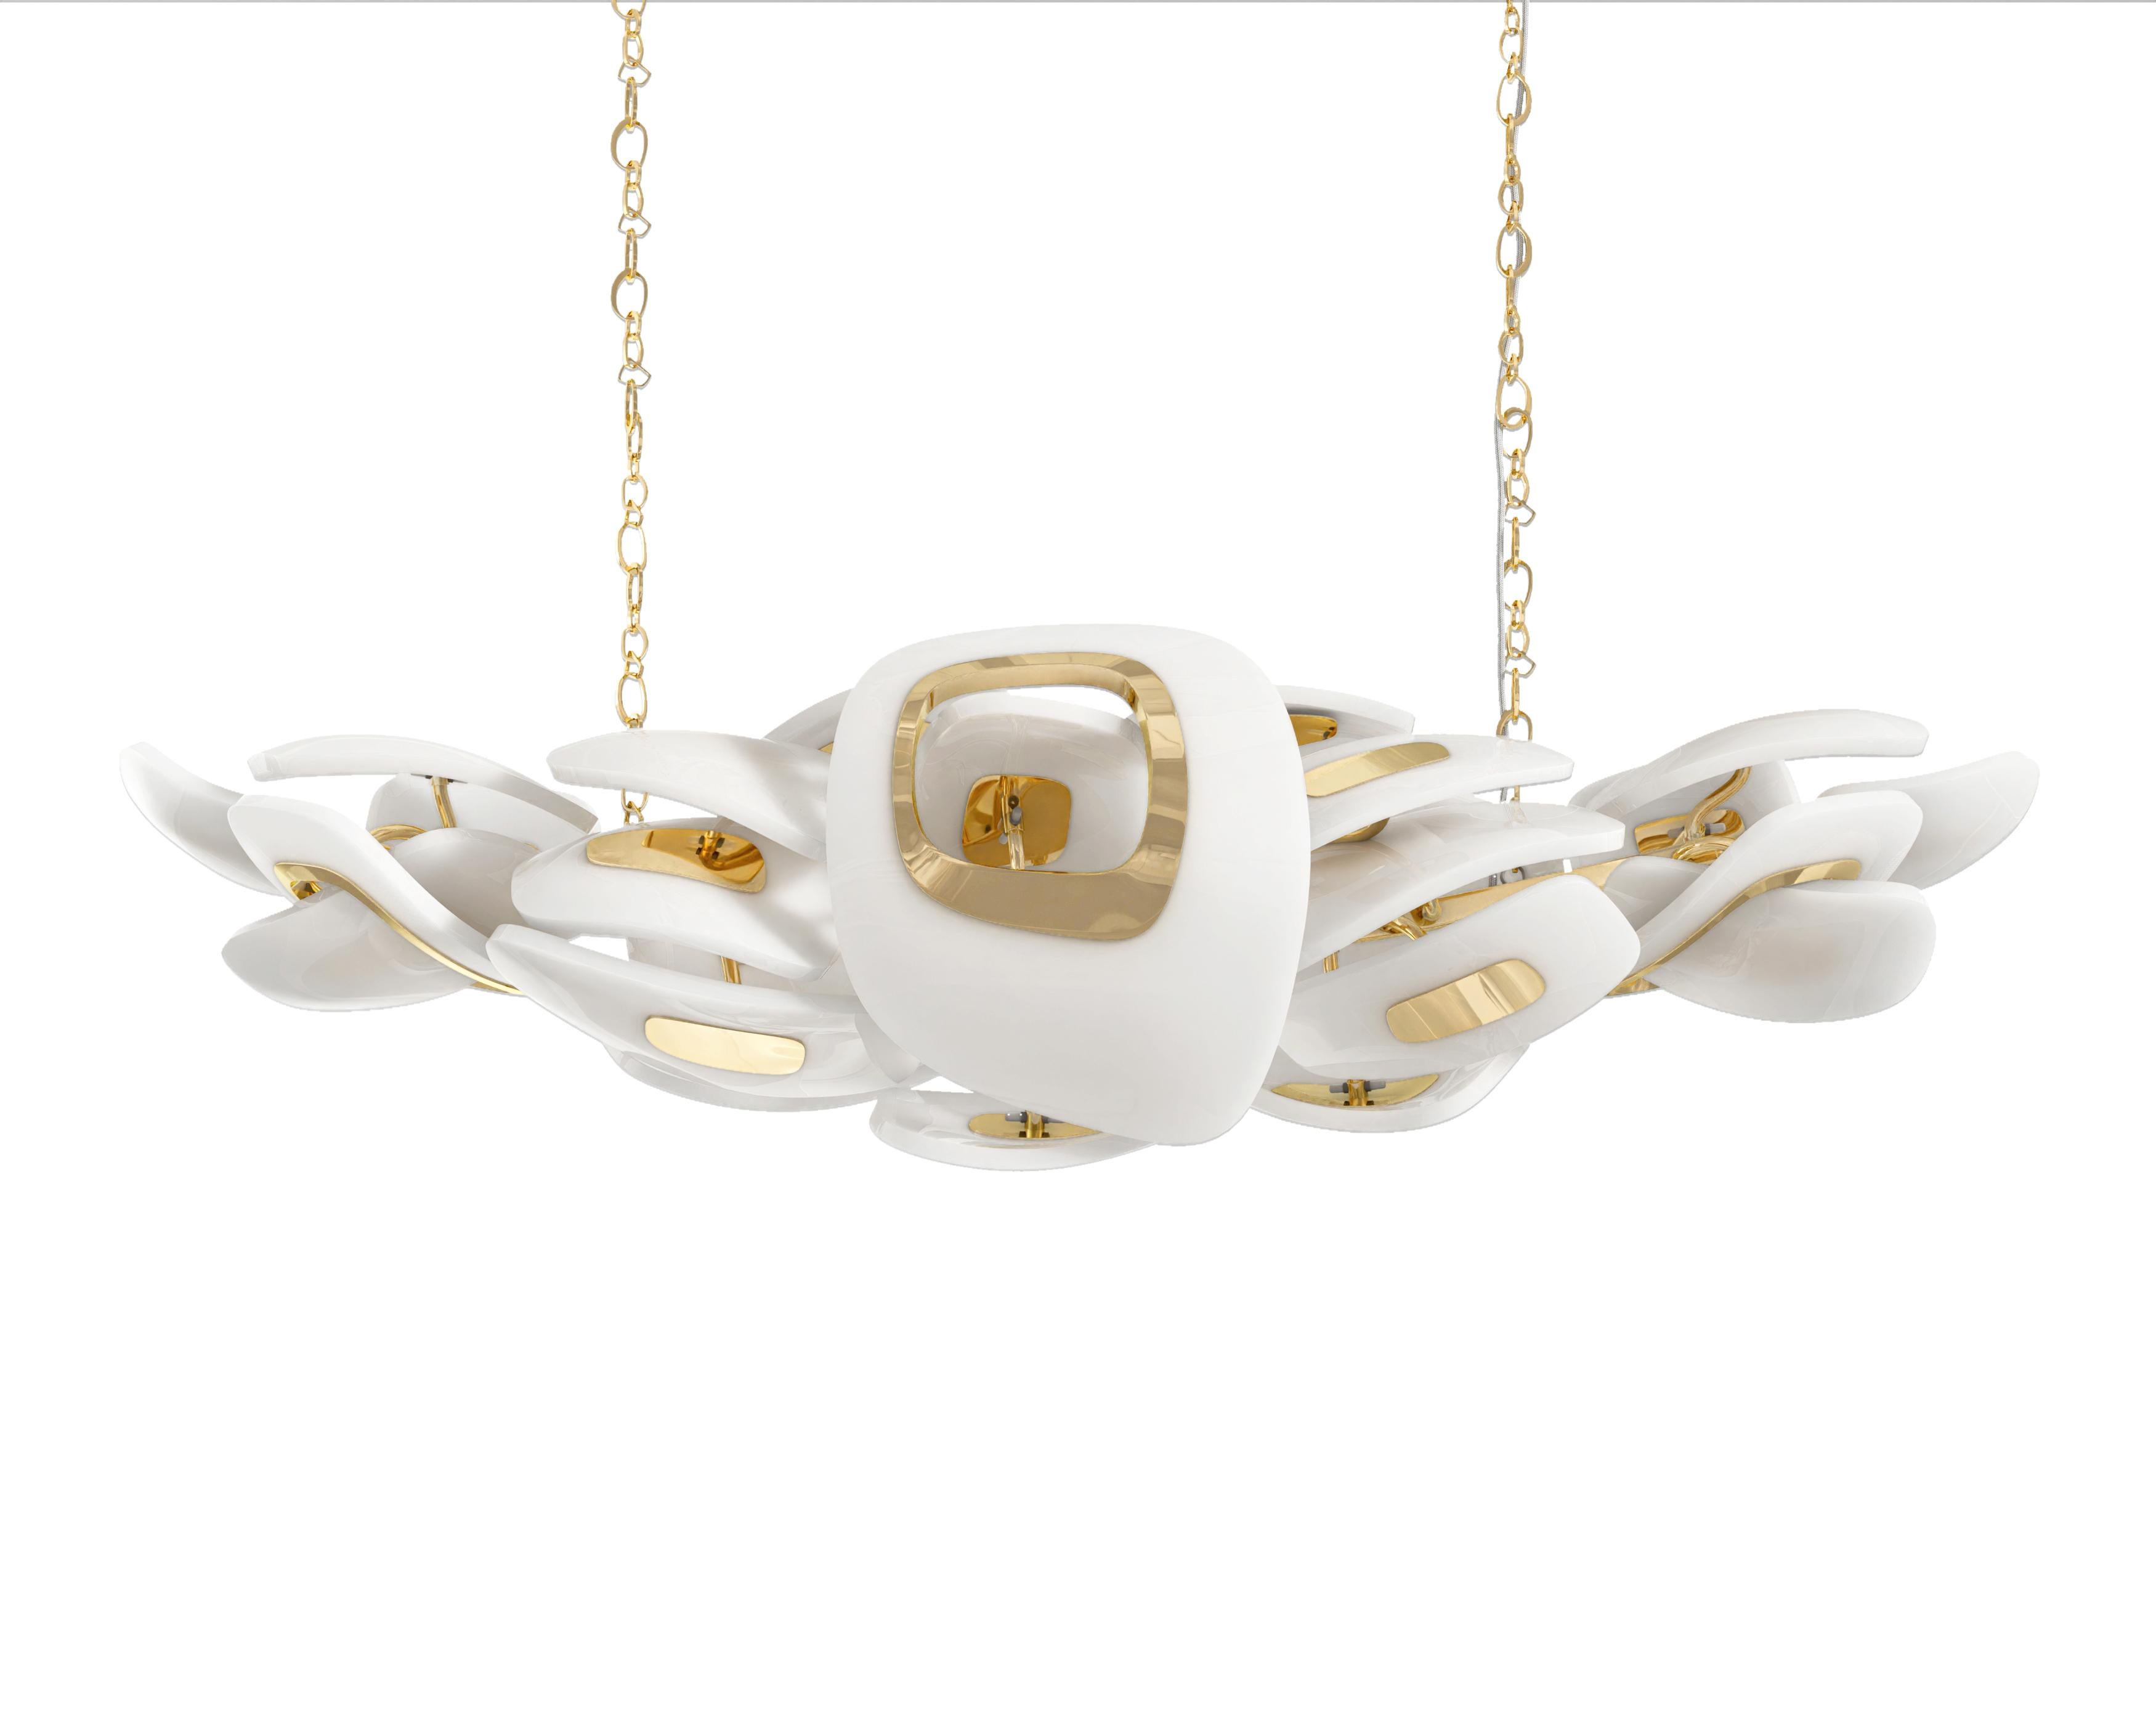 Swan Horizontal Chandelier in Polished Bronze and Murano Glass by Palena